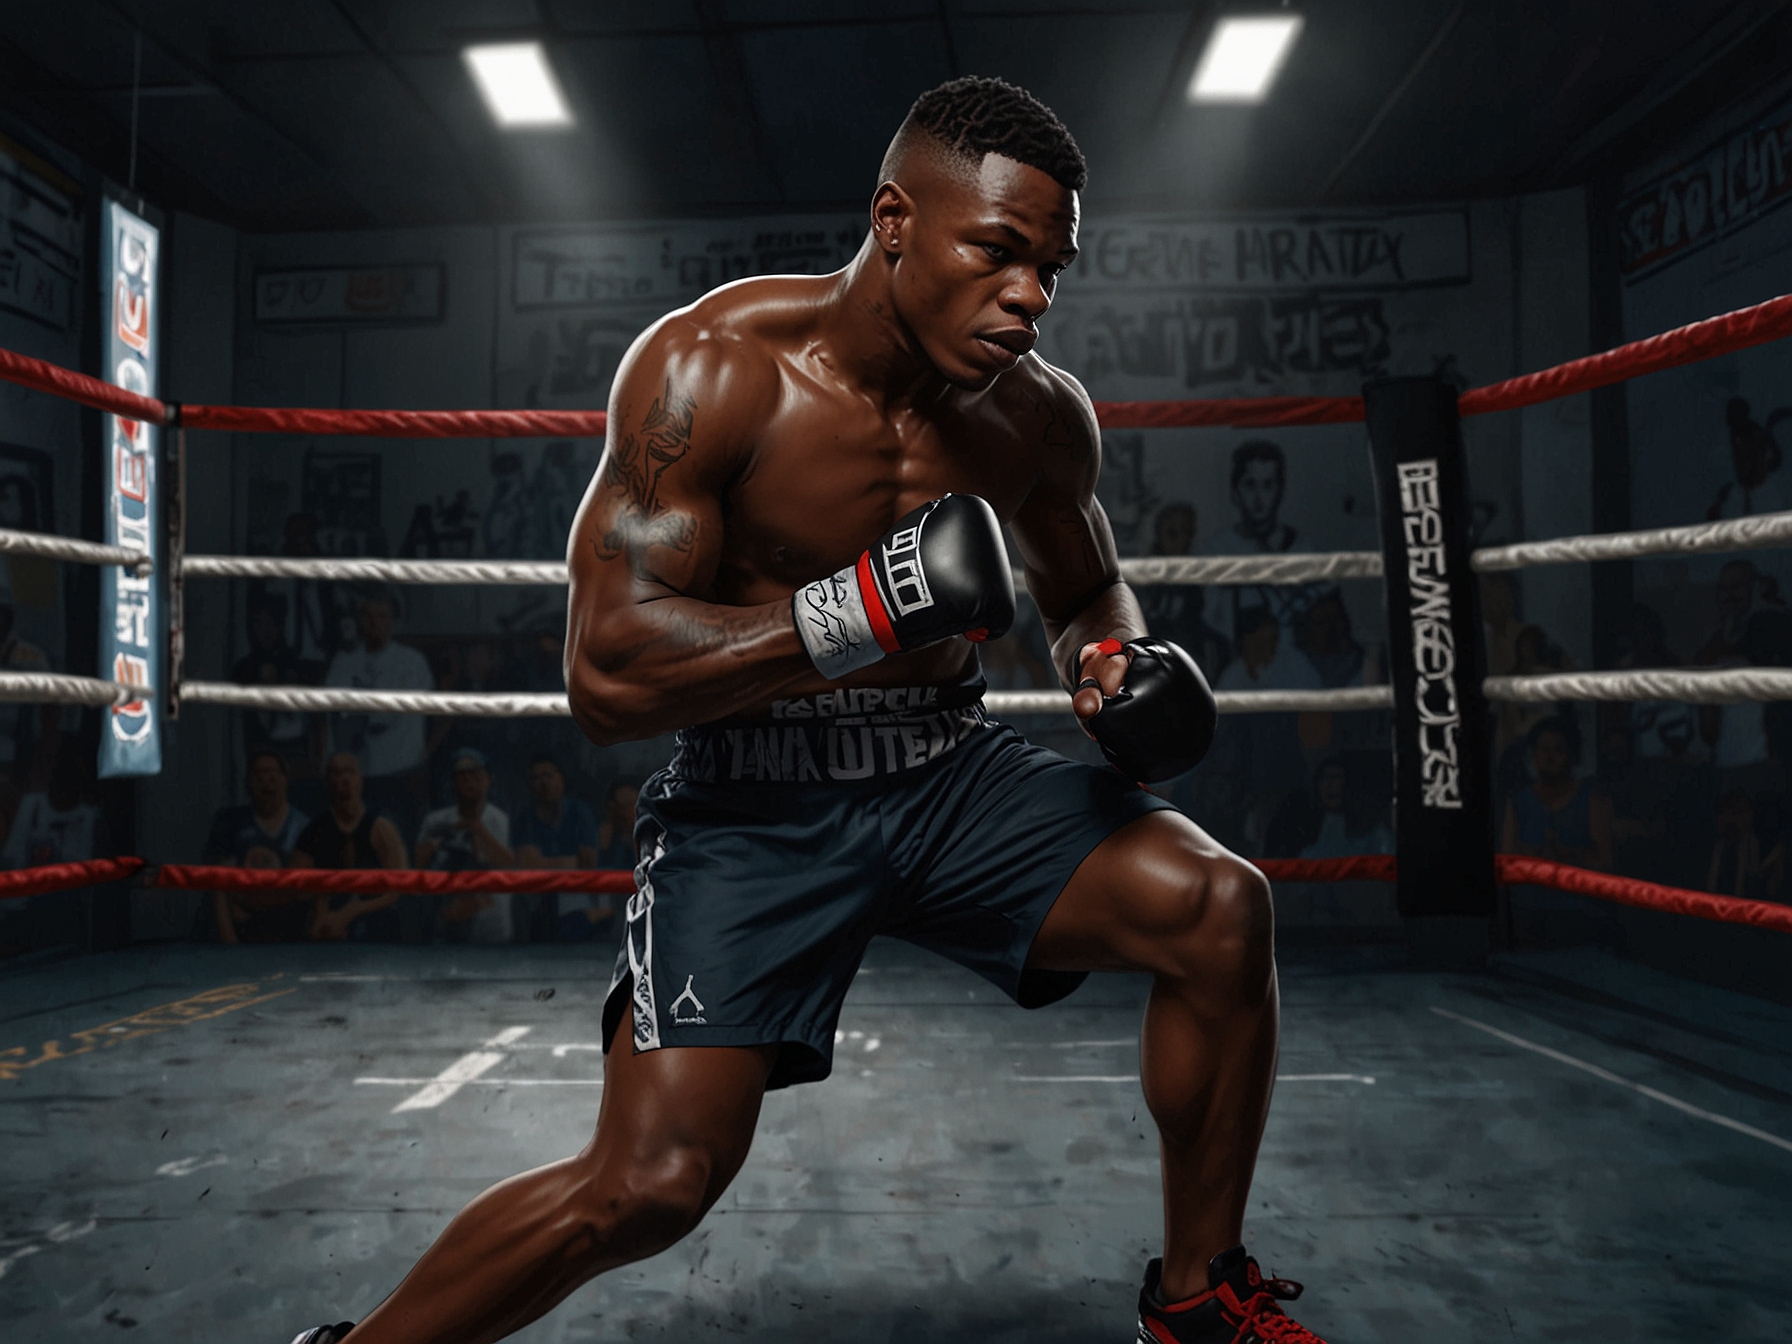 Israel Adesanya intensively training in a dimly lit gym, symbolizing his focus and determination in preparation for his highly anticipated fight at UFC 305.